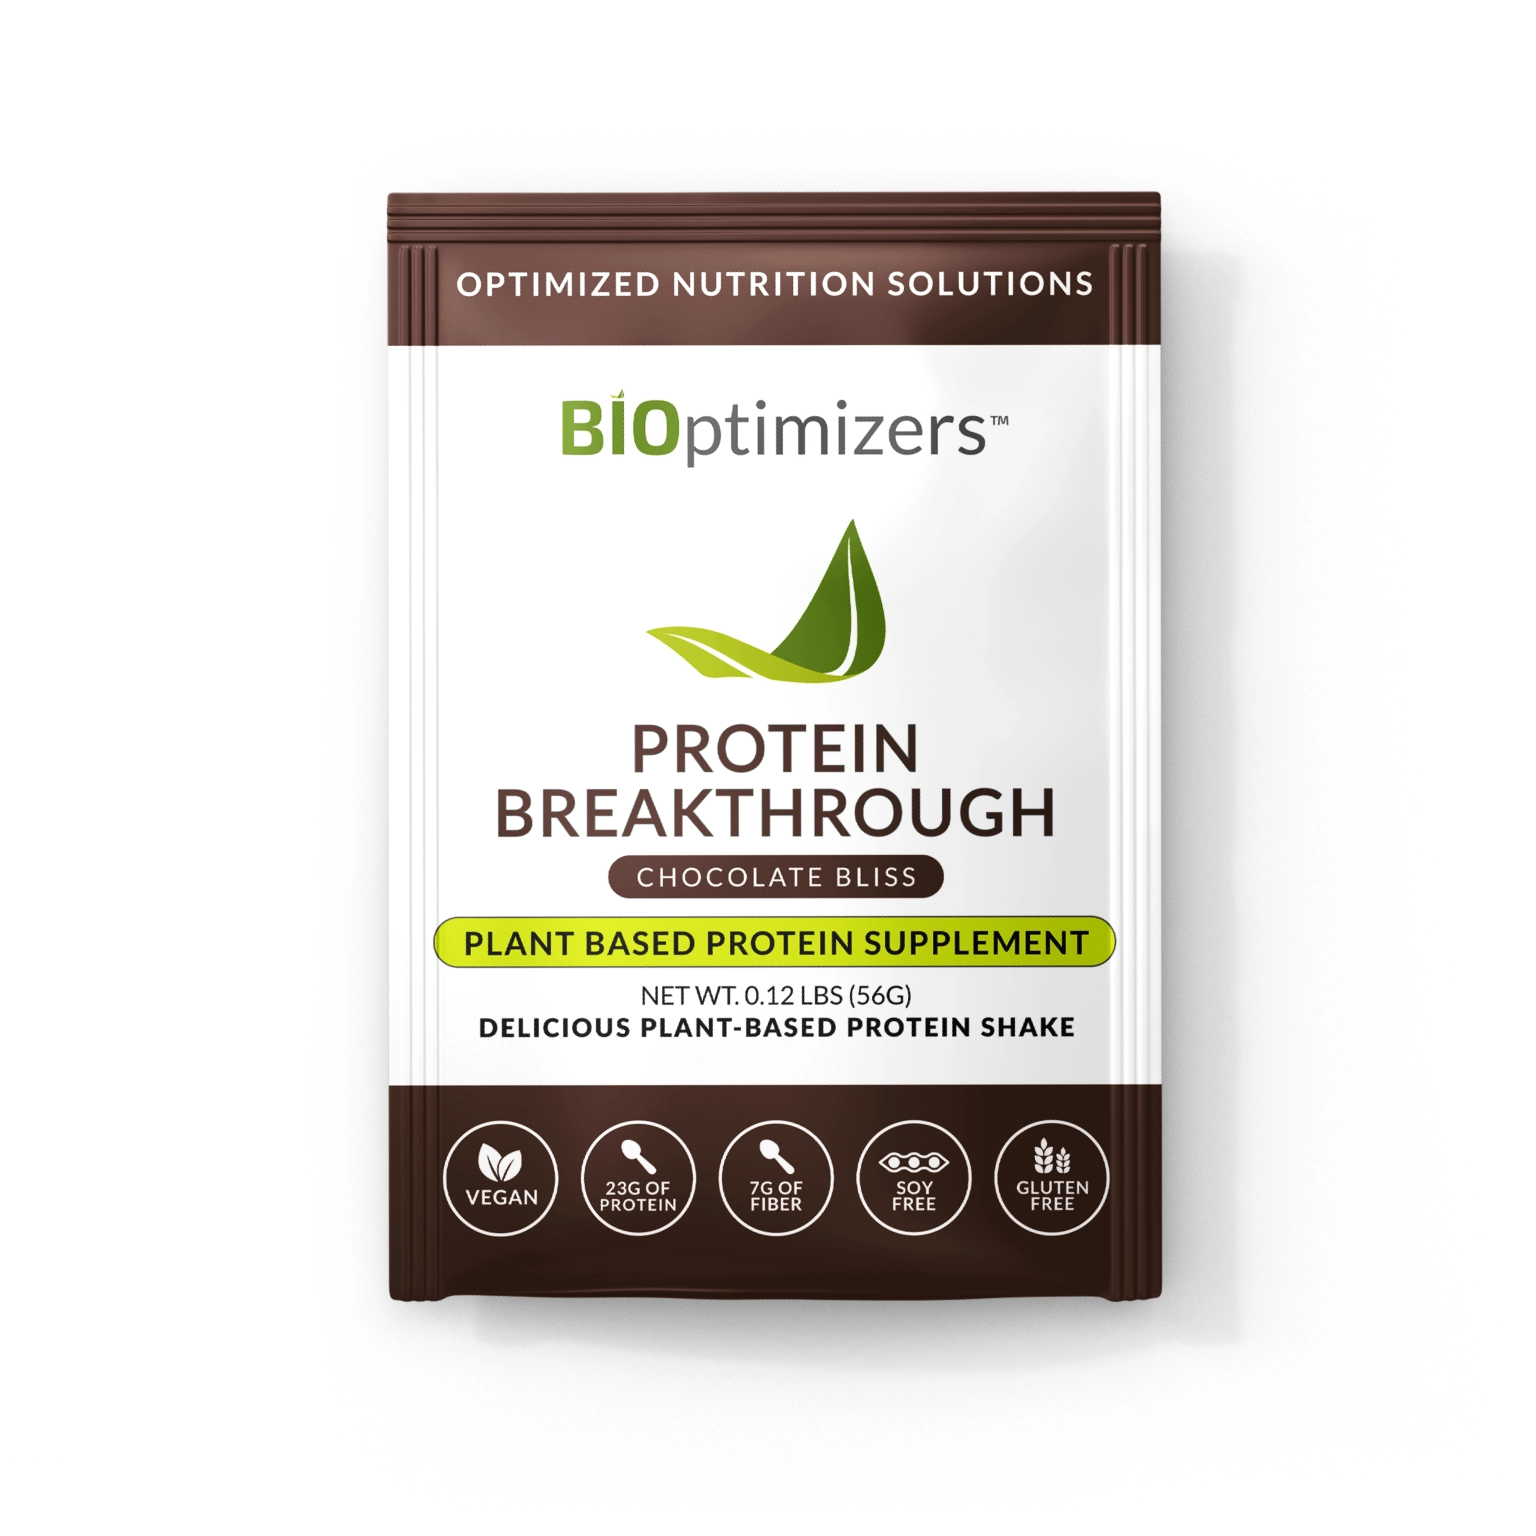 PROTEIN BREAKTHROUGH - CHOCOLATE BLISS (Travel Packets / 56g each)